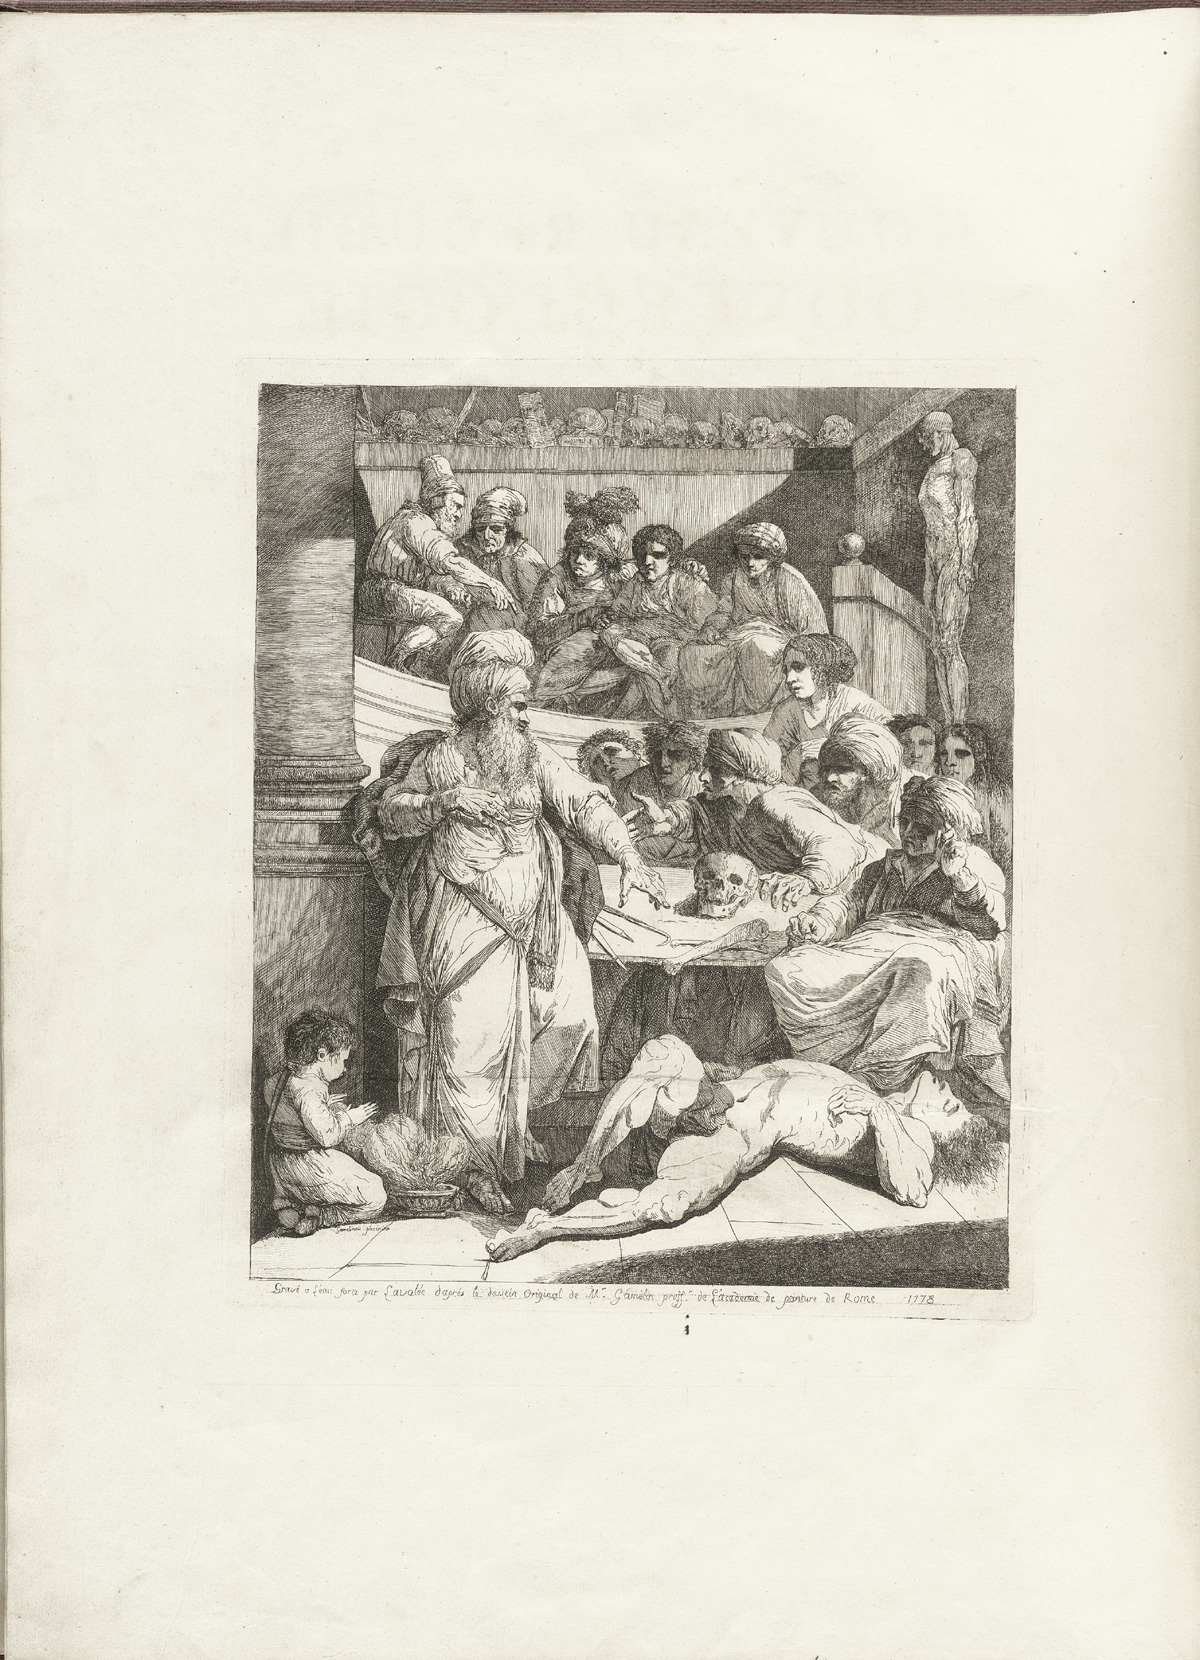 Etched and engraved frontispiece showing a lecture taking place in a Classical anatomical theater; an older man with a turban and large beard (most likely Avicenna or Rhazes) points speaks to a group of students, one of them female, as he stands in front of a table with a skull on it and a cadaver lies on the ground in front of him; in the upper right of the page is a manikin or statue, while behind the lecturer is a large column; from Jacques Gamelin’s Nouveau recueil d’osteologie et de myologie, NLM Call no.: WZ 260 G178m 1779.